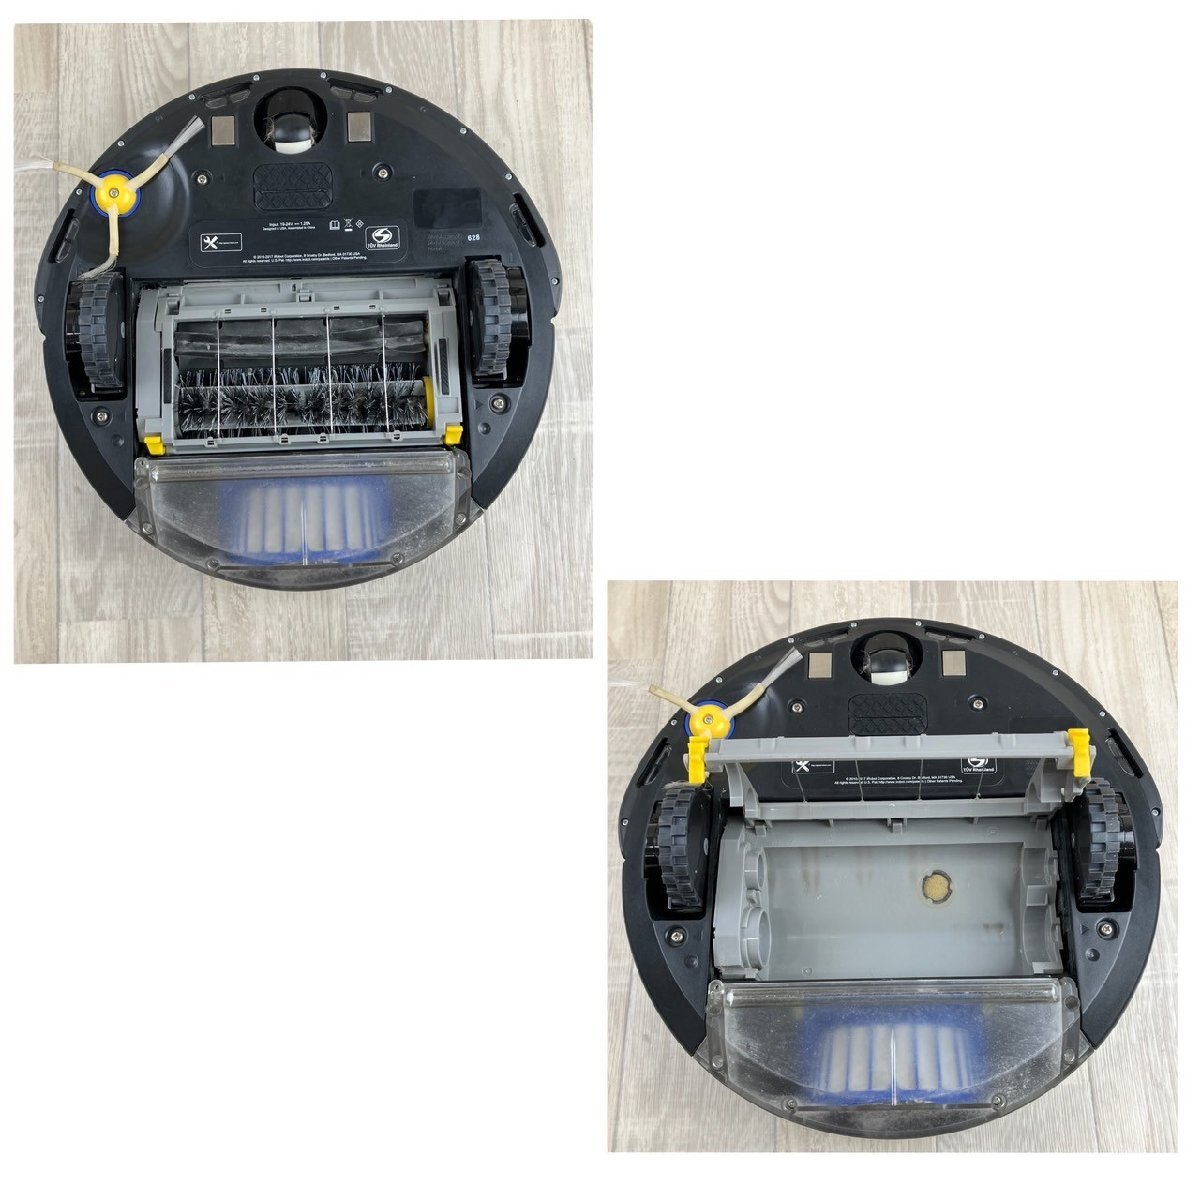 USED iRobot I robot Roomba roomba 628 R628060japa net limitated model robot vacuum cleaner electrification operation verification settled manual attaching automatic vacuum cleaner 